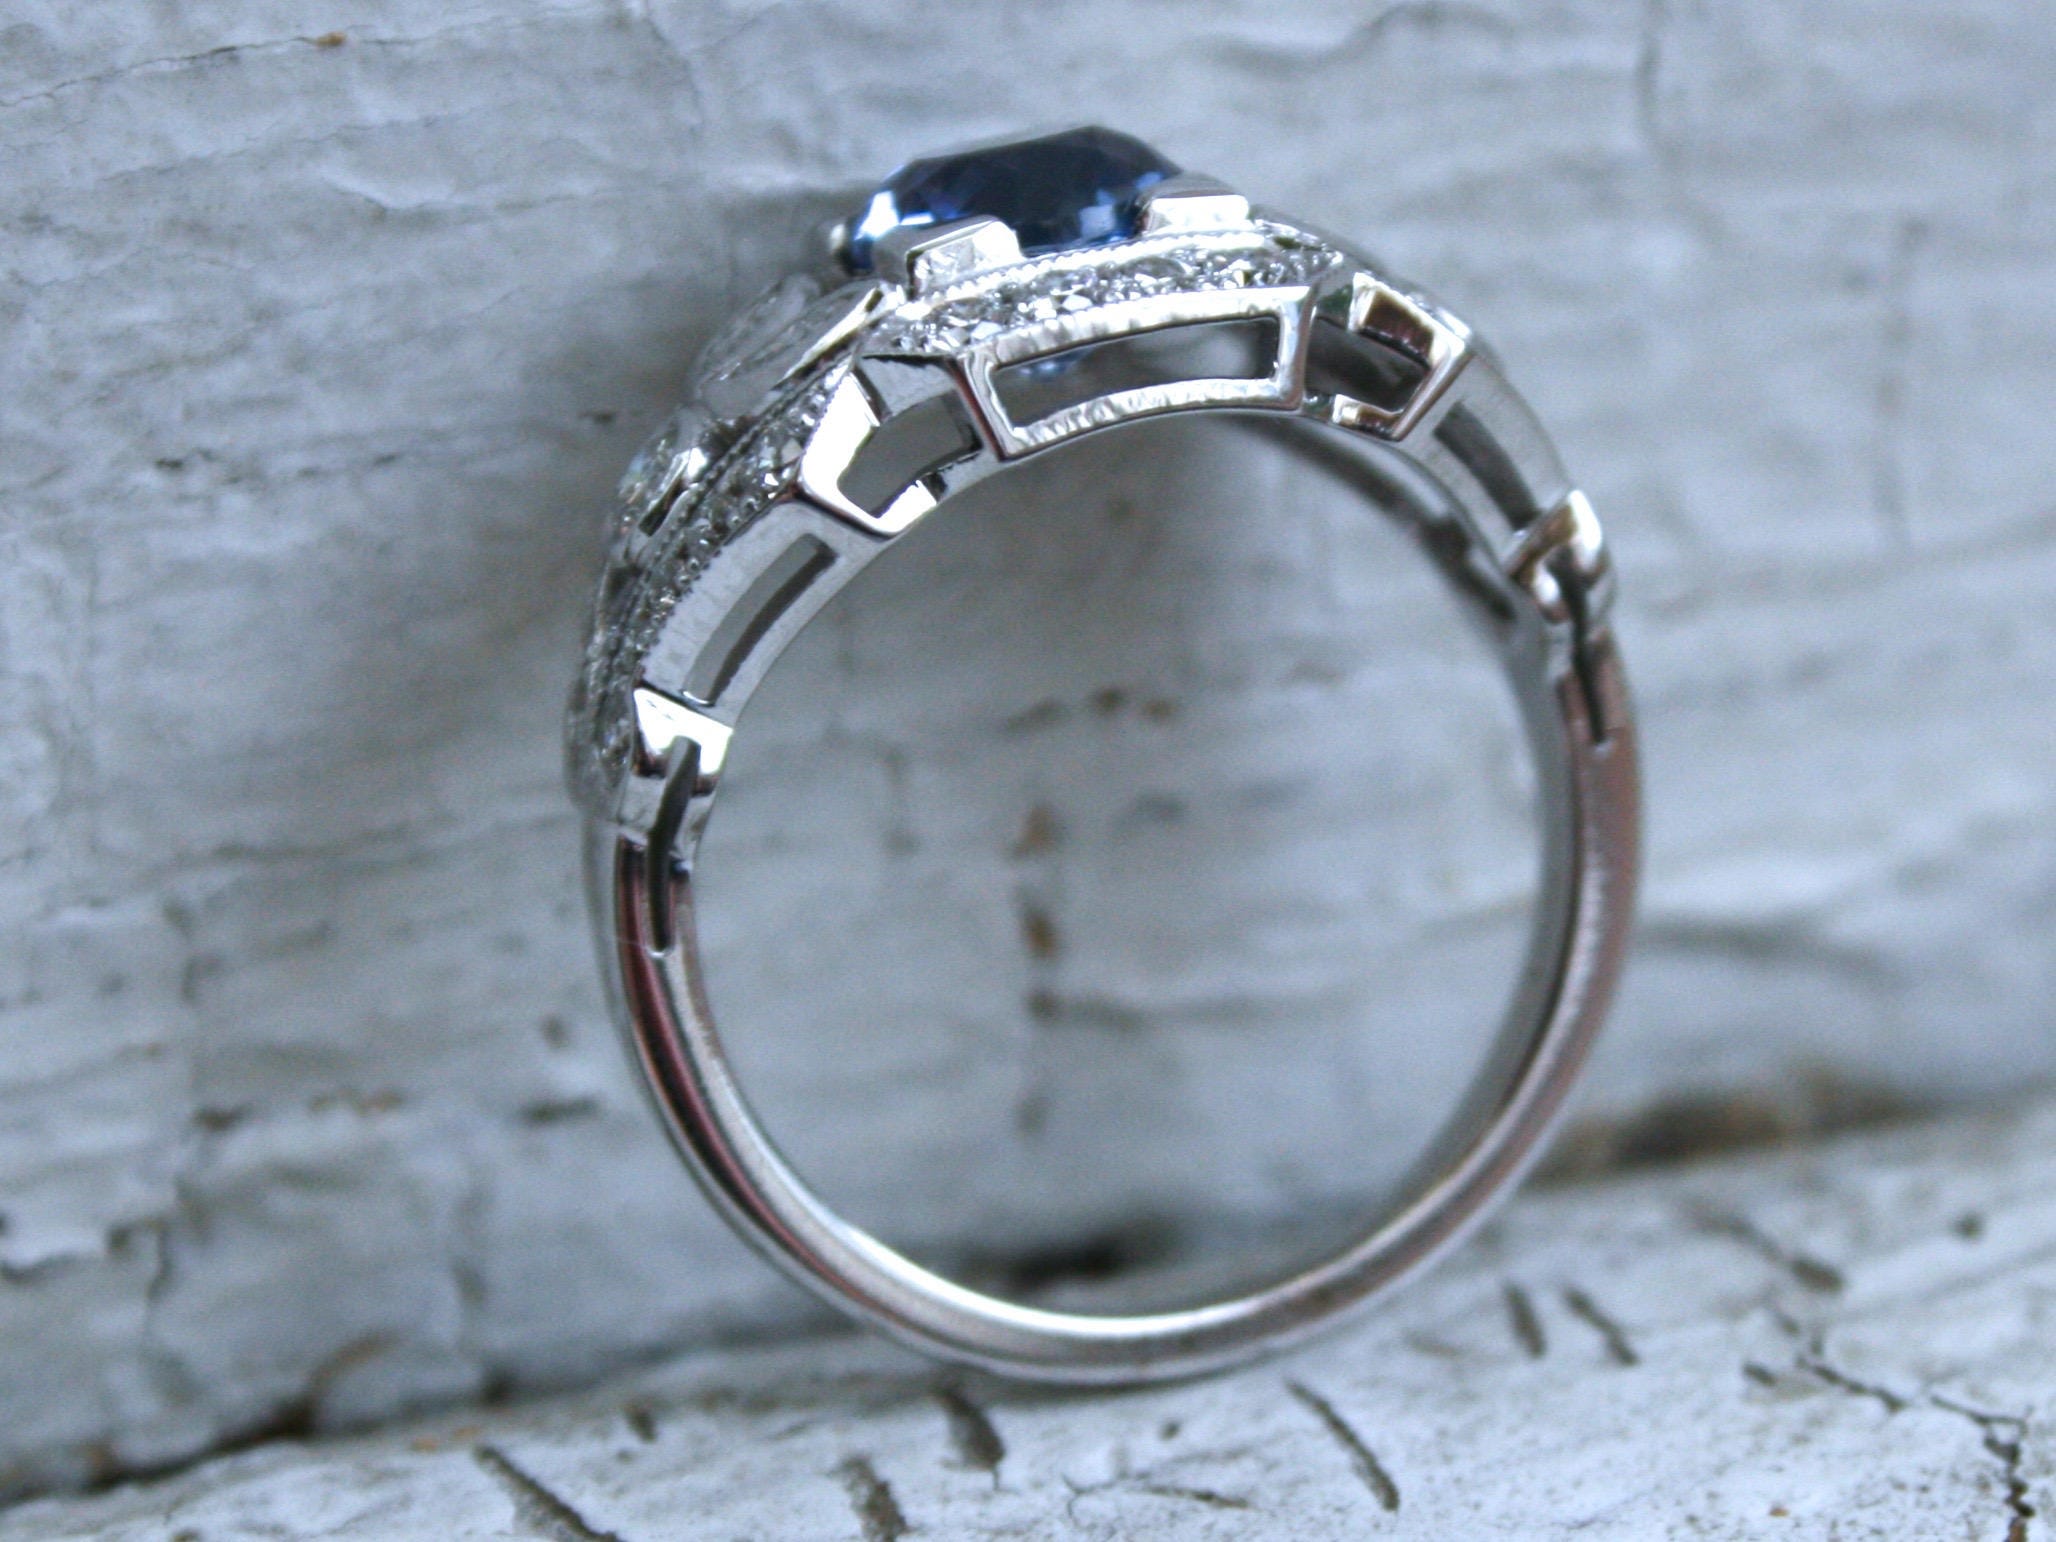 Sapphire Floral Diamond Ring Engagement Ring Wedding Ring in 14K White Gold.